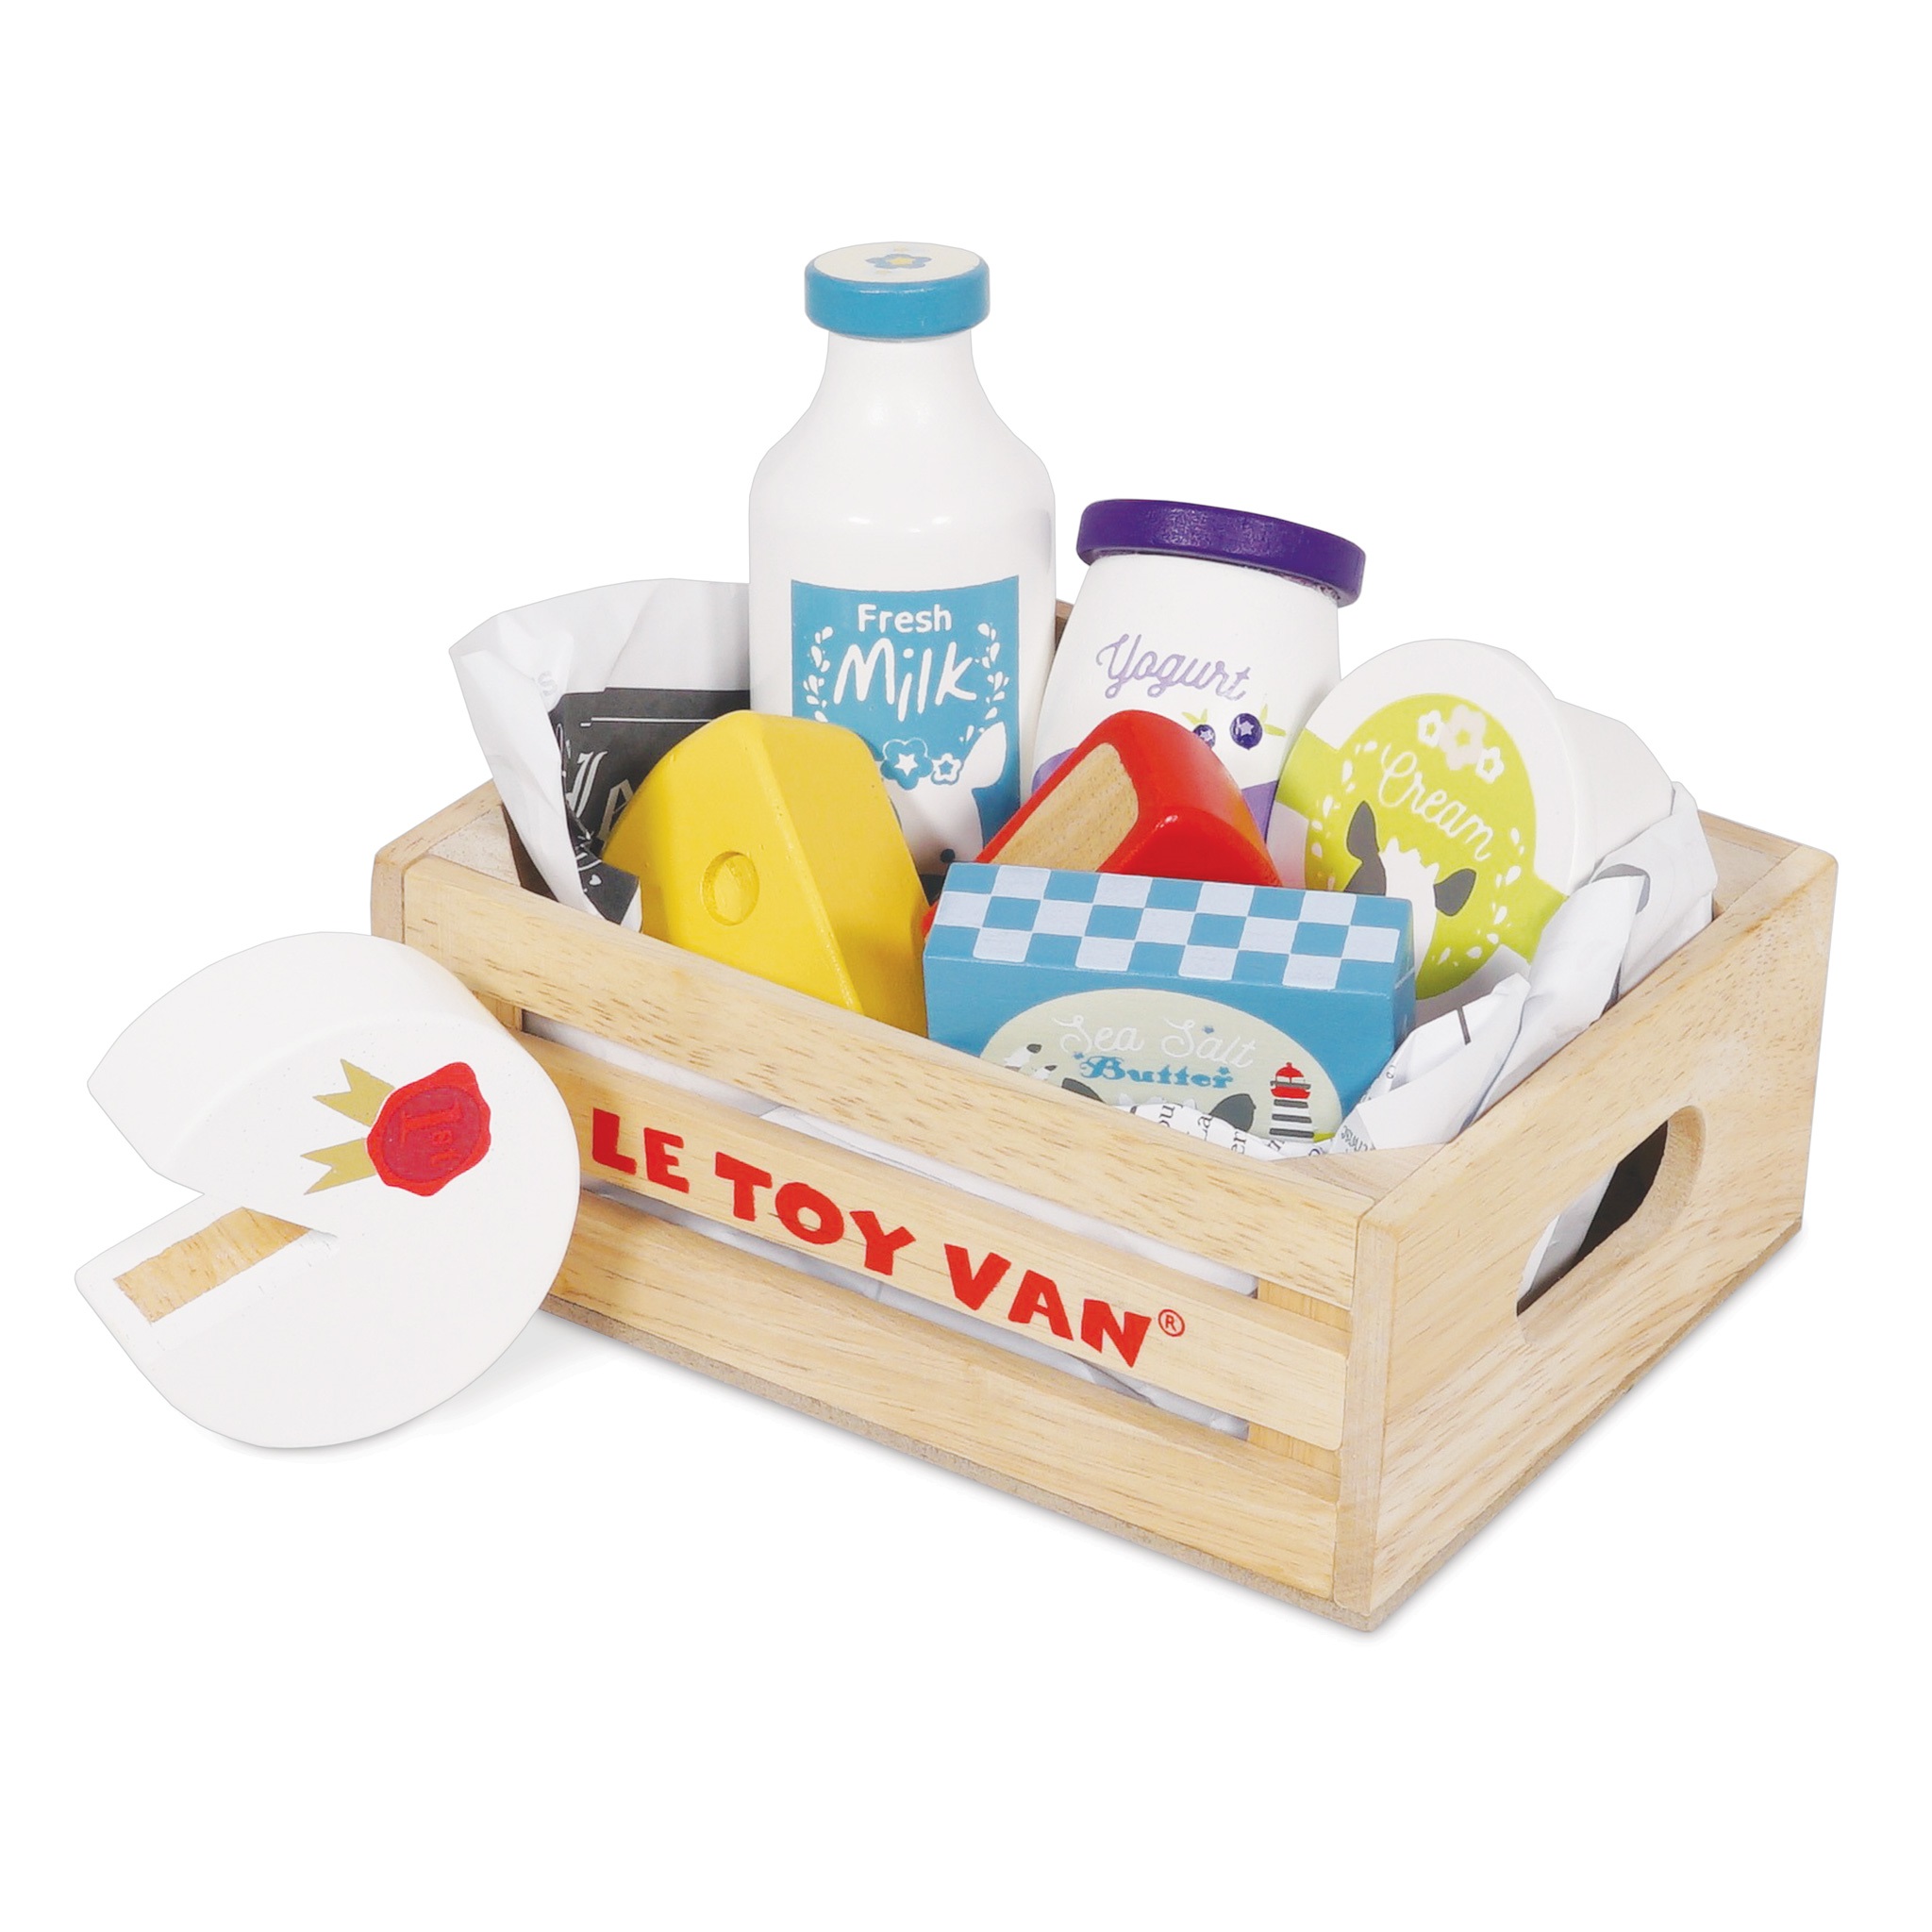 Le Toy Van Honeybake Eggs and Dairy Crate